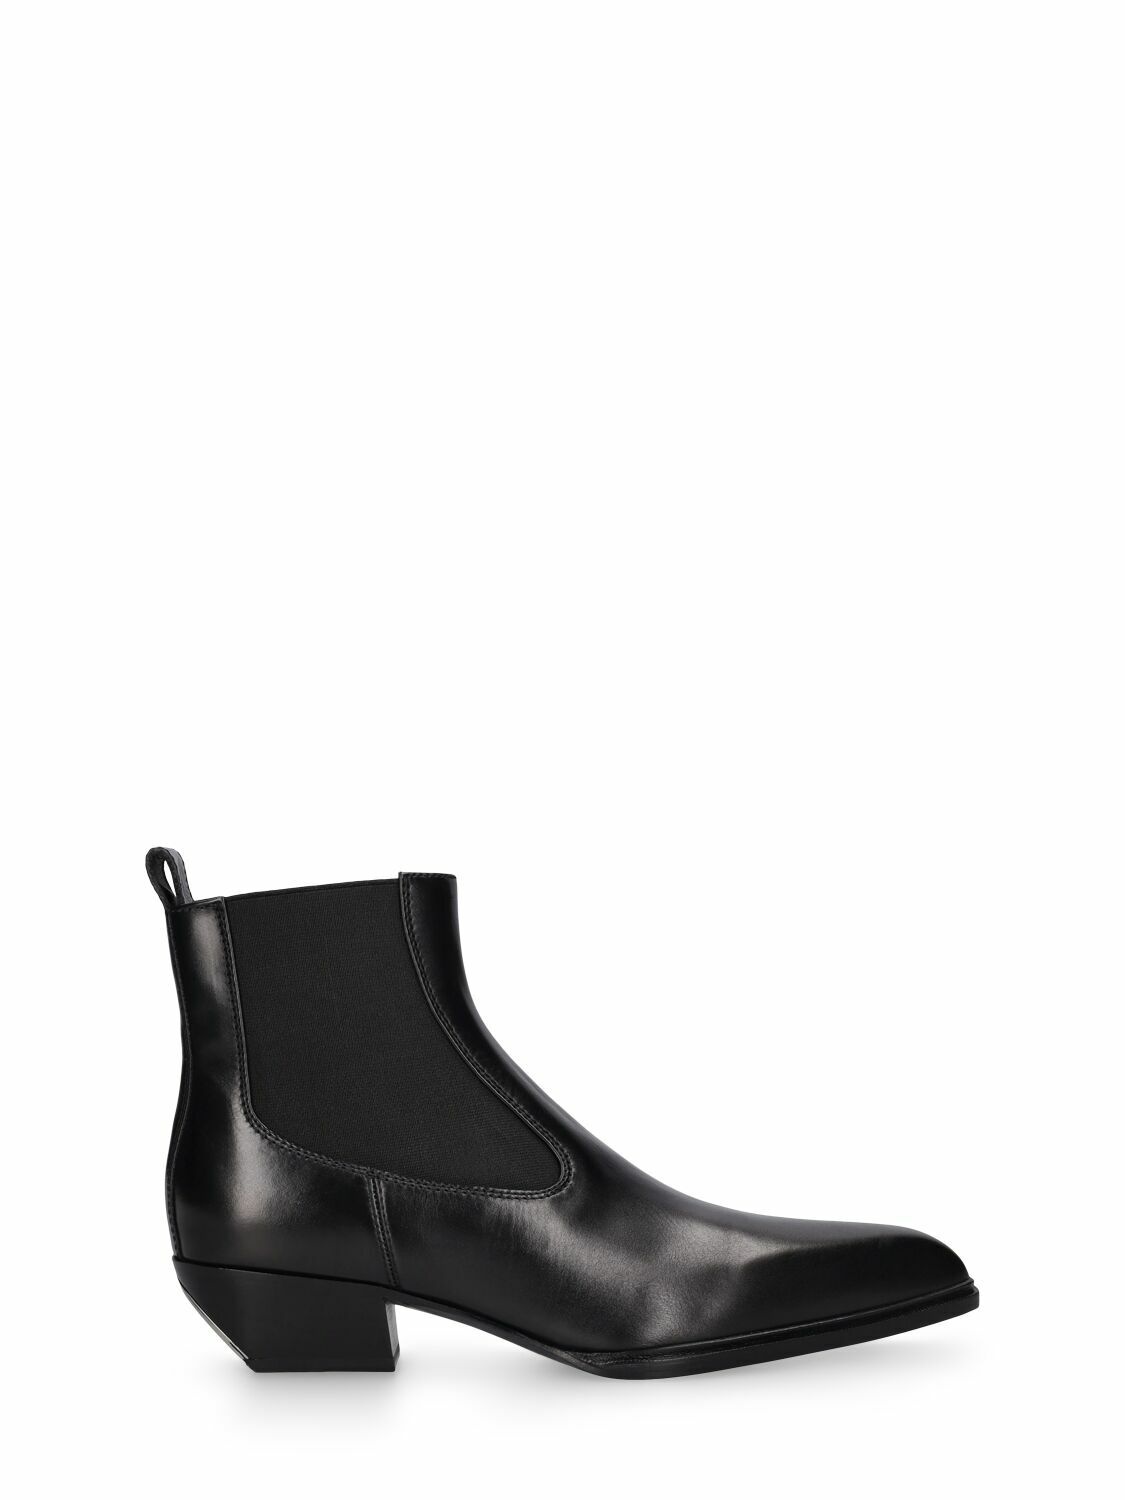 Photo: ALEXANDER WANG - 40mm Slick Leather Ankle Boots